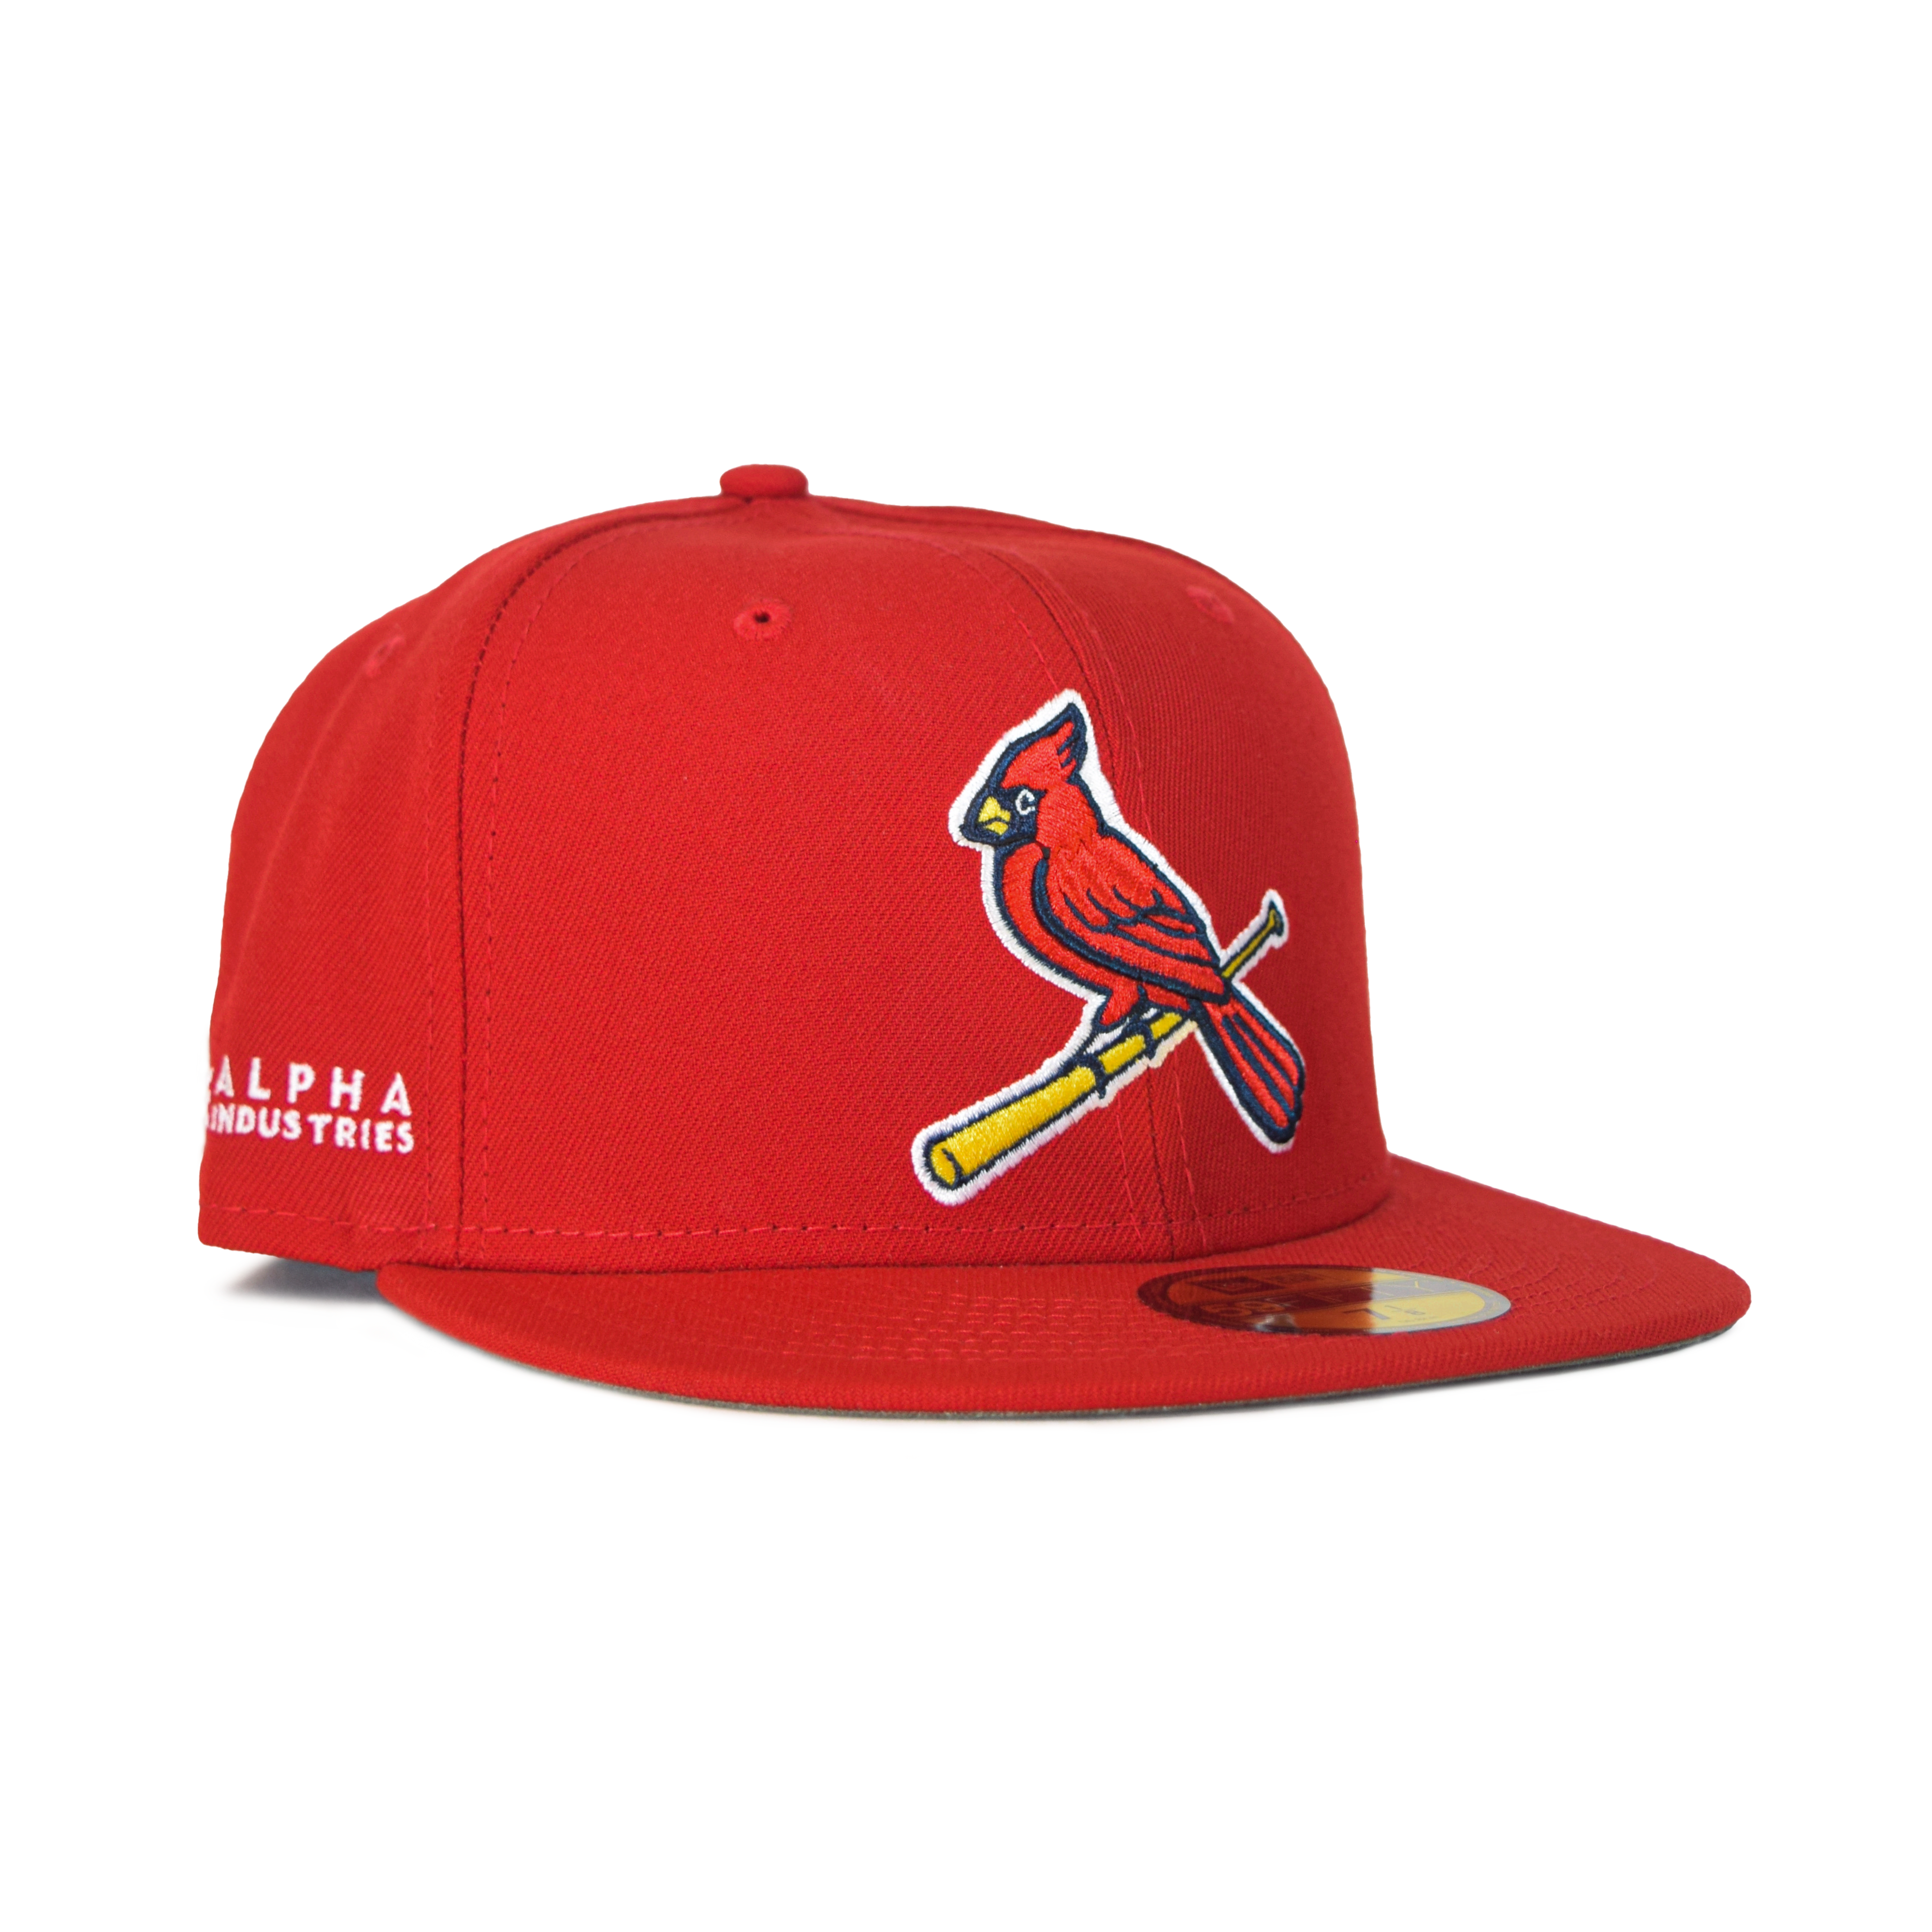 St Louis Cardinals Bird On Bat Green and White Custom 59FIFTY Fitted Hat -  ShopperBoard